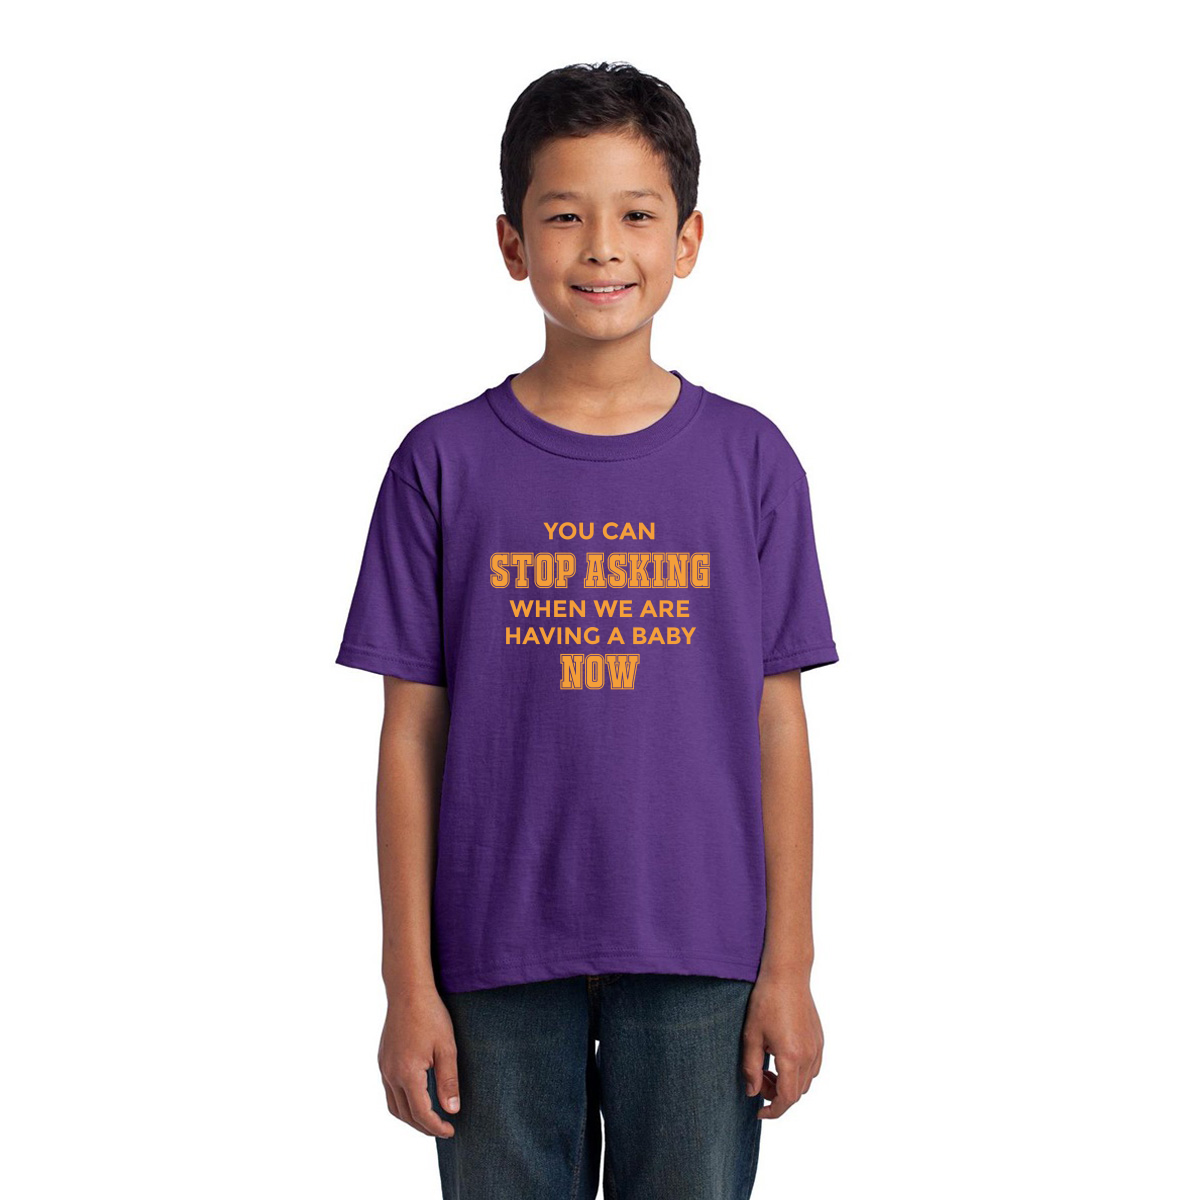 You can stop asking when we are having baby NOW Kids T-shirt | Purple